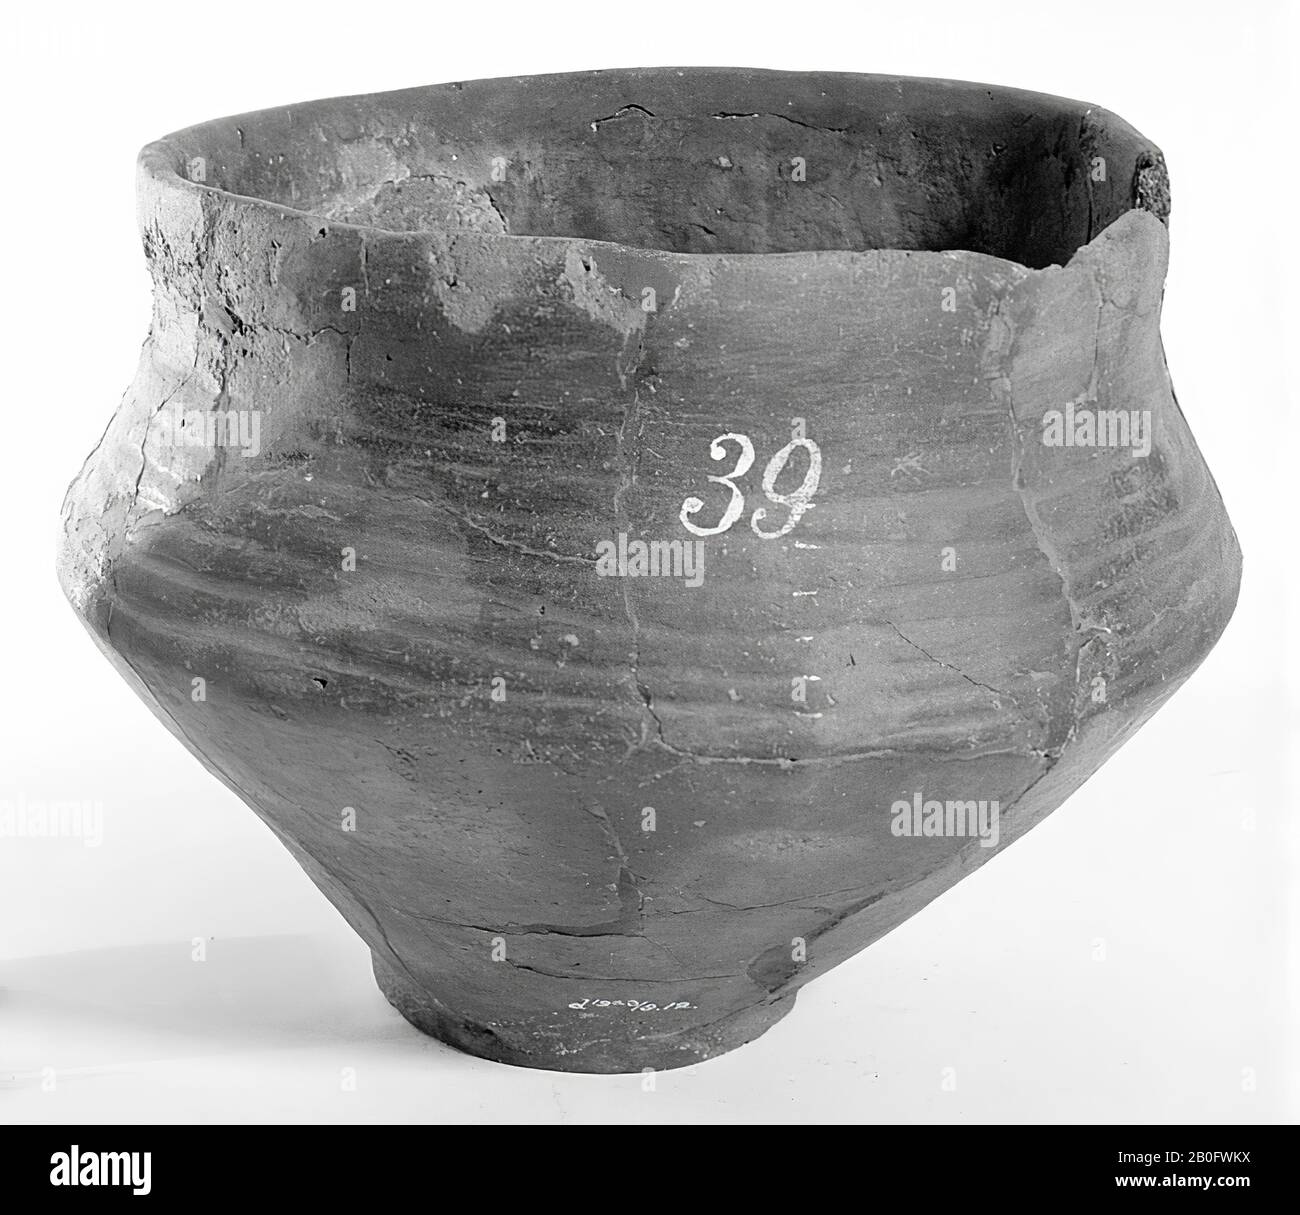 Capillary urn of earthenware with rim and pressed rings and with separately formed foot. Contains cremated residues, urn, earthenware, h: 17 cm, diam: 23 cm, prehistory -1200 Stock Photo